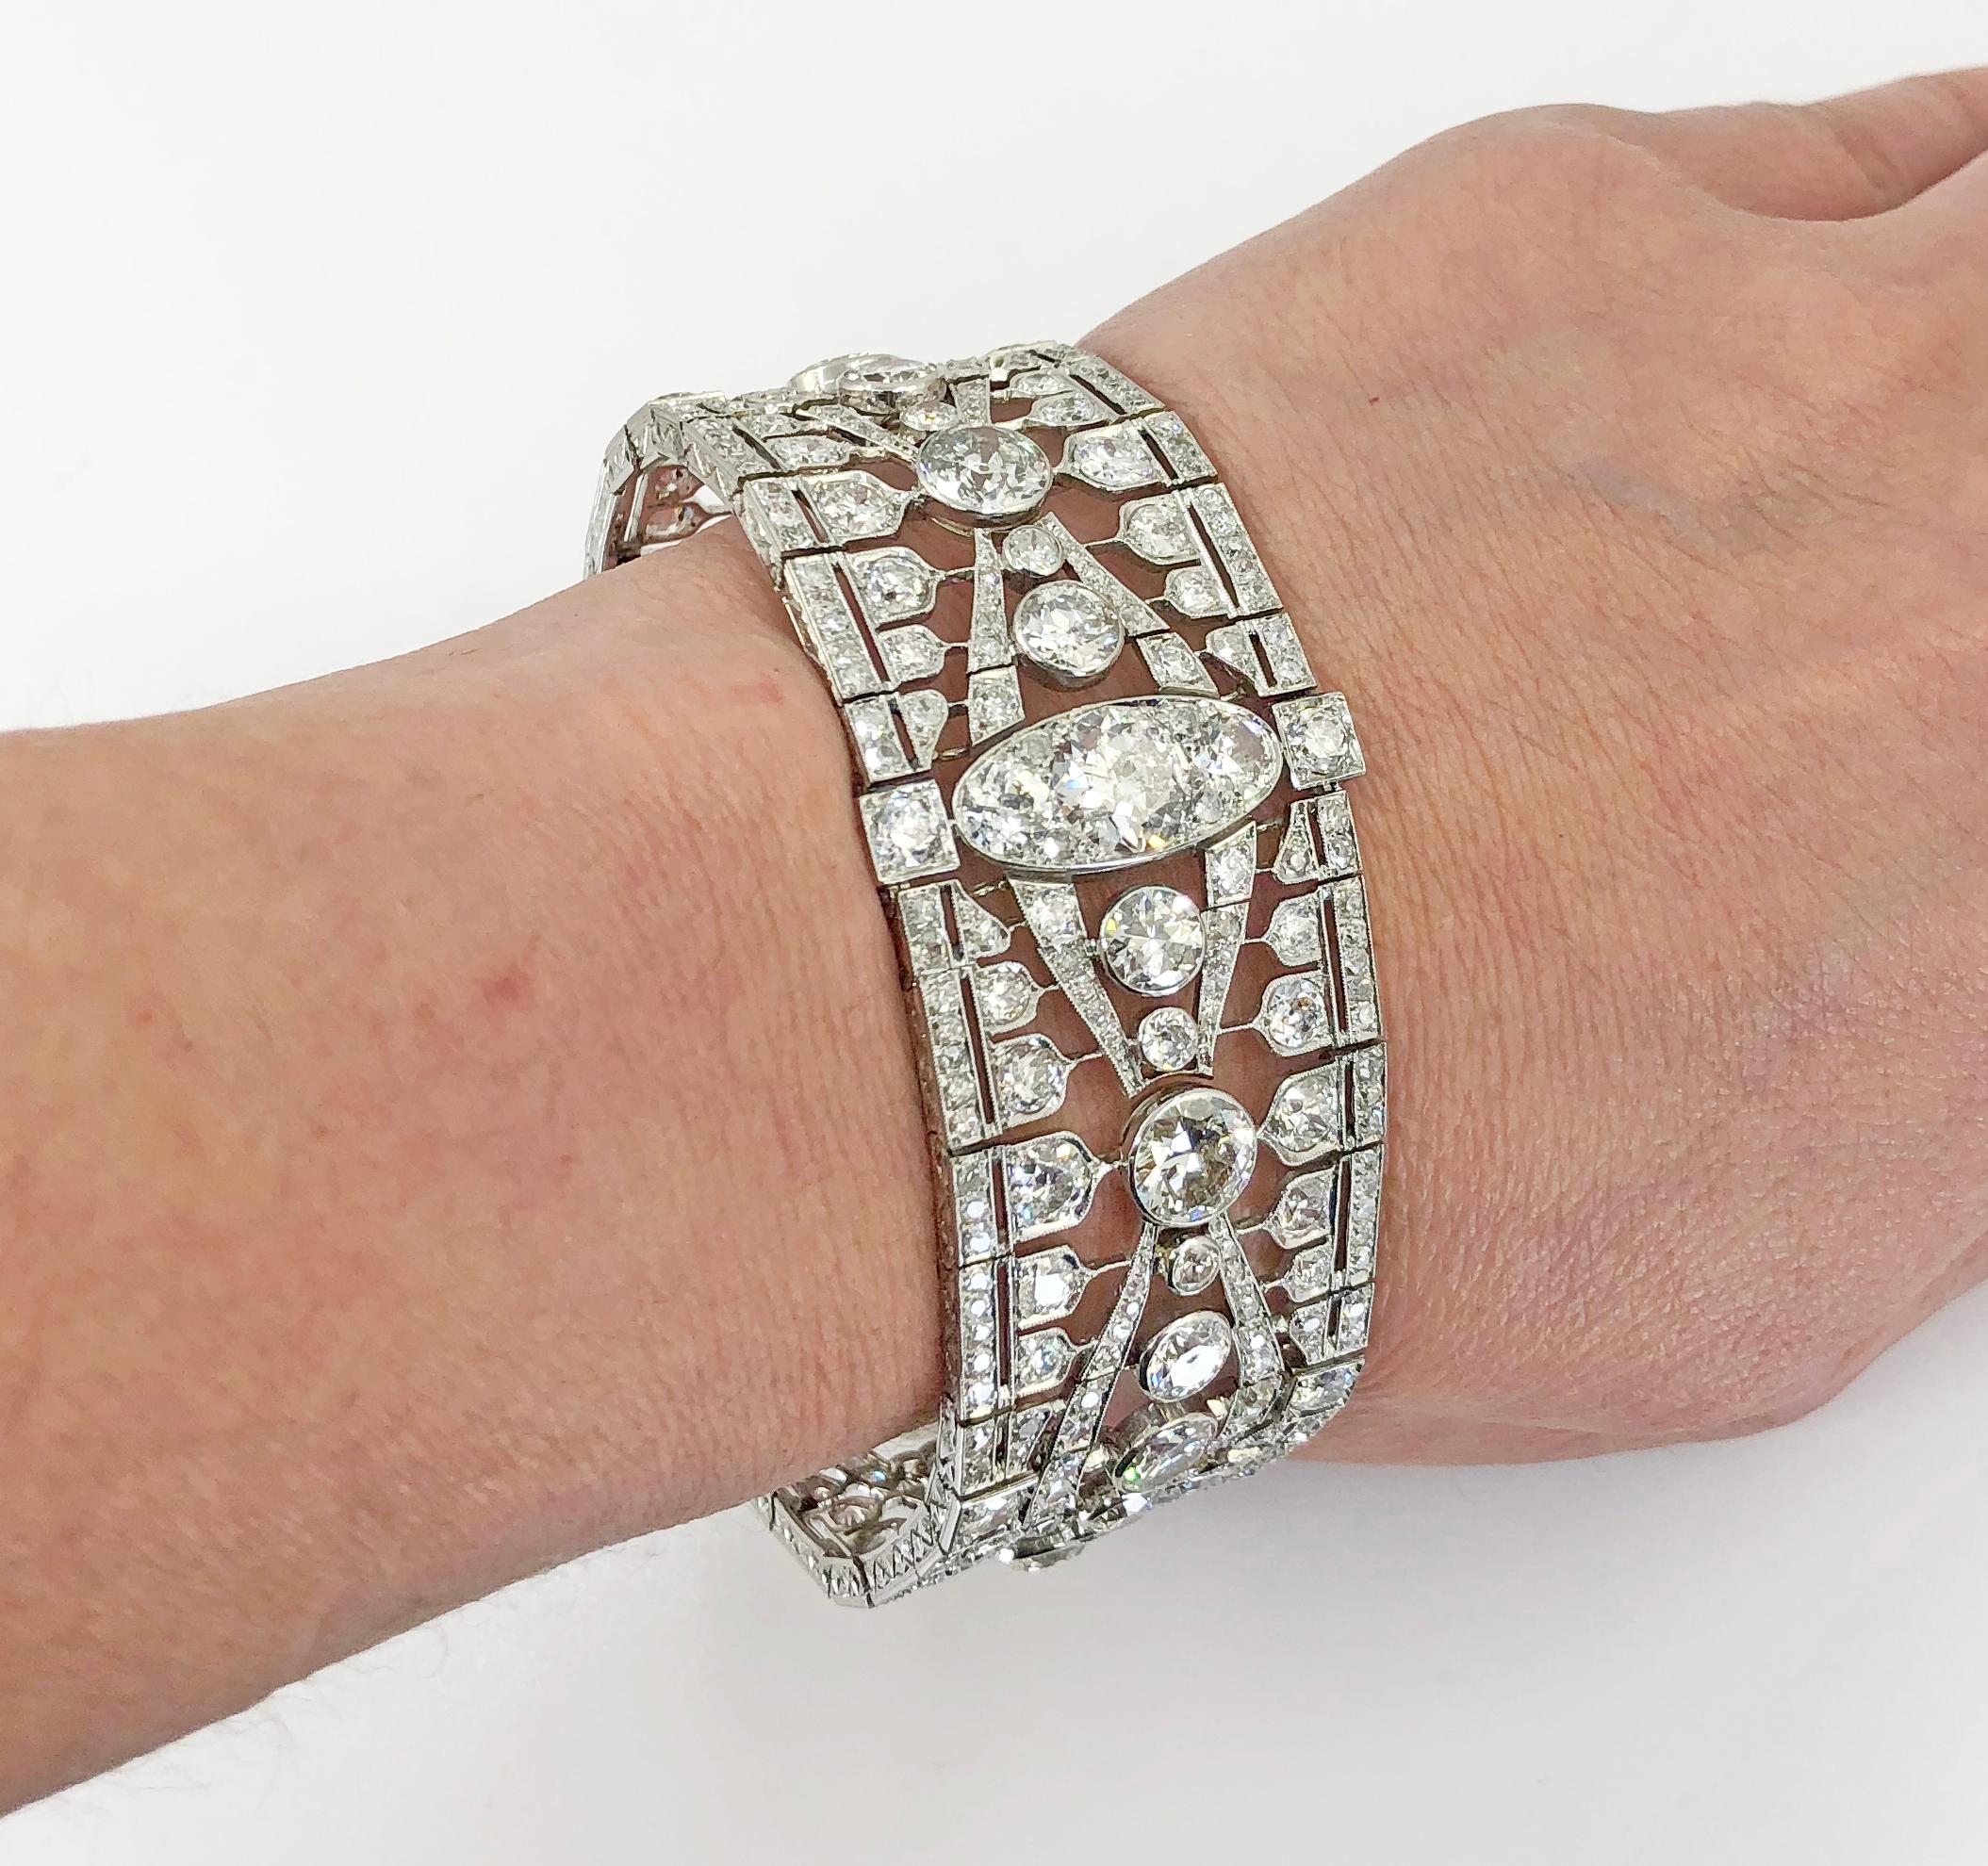 Art Deco Diamond Articulated Bracelet in Platinum.

An articulated French Art Deco openwork bracelet emblematic of the era, with brilliant scintillation throughout. 

Diamond weight approx. 35.00 carats total. Measures approx. 7.25